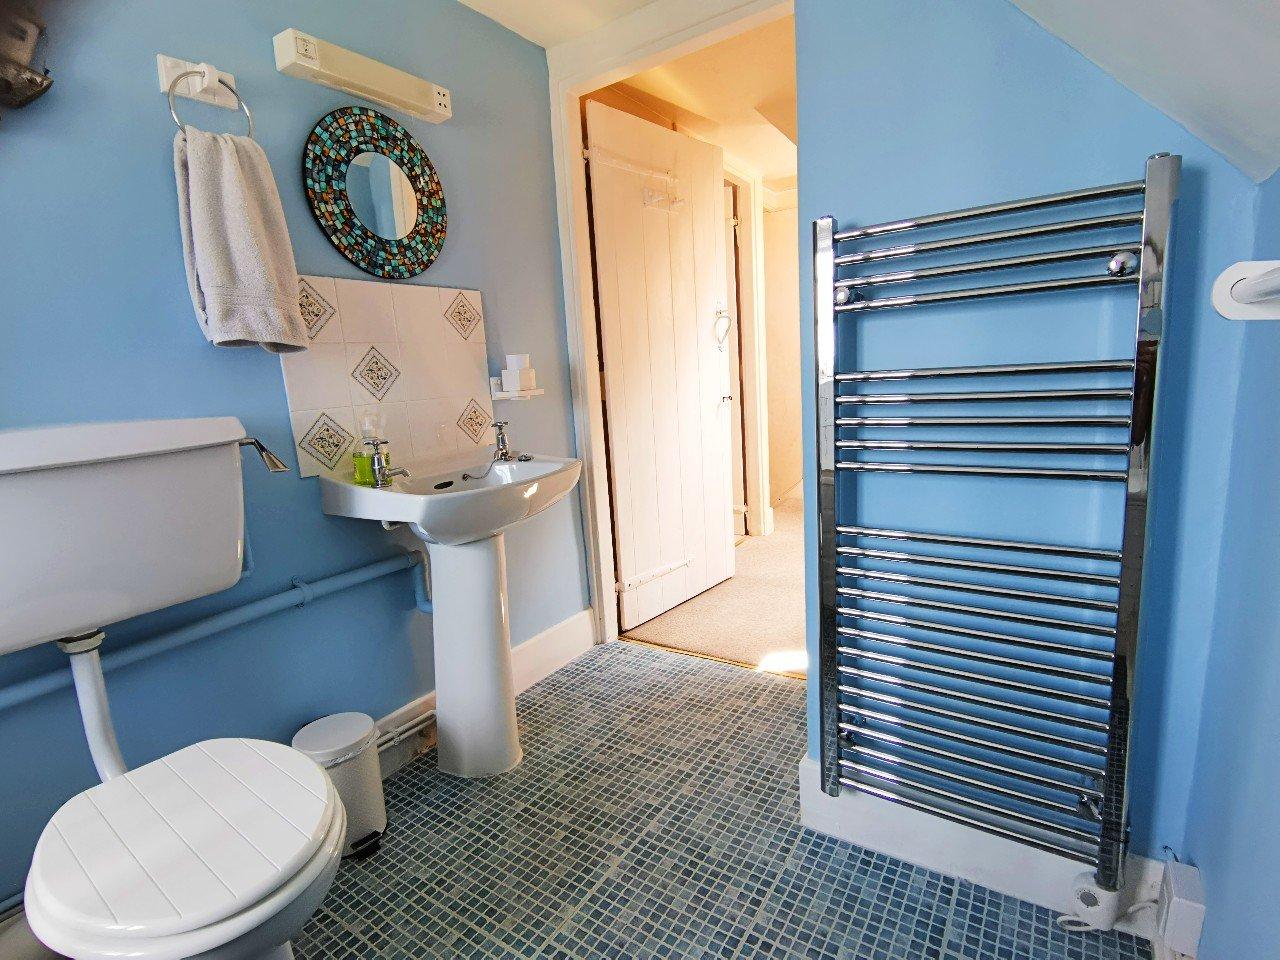 Family bathroom with shower and heated towel rail.